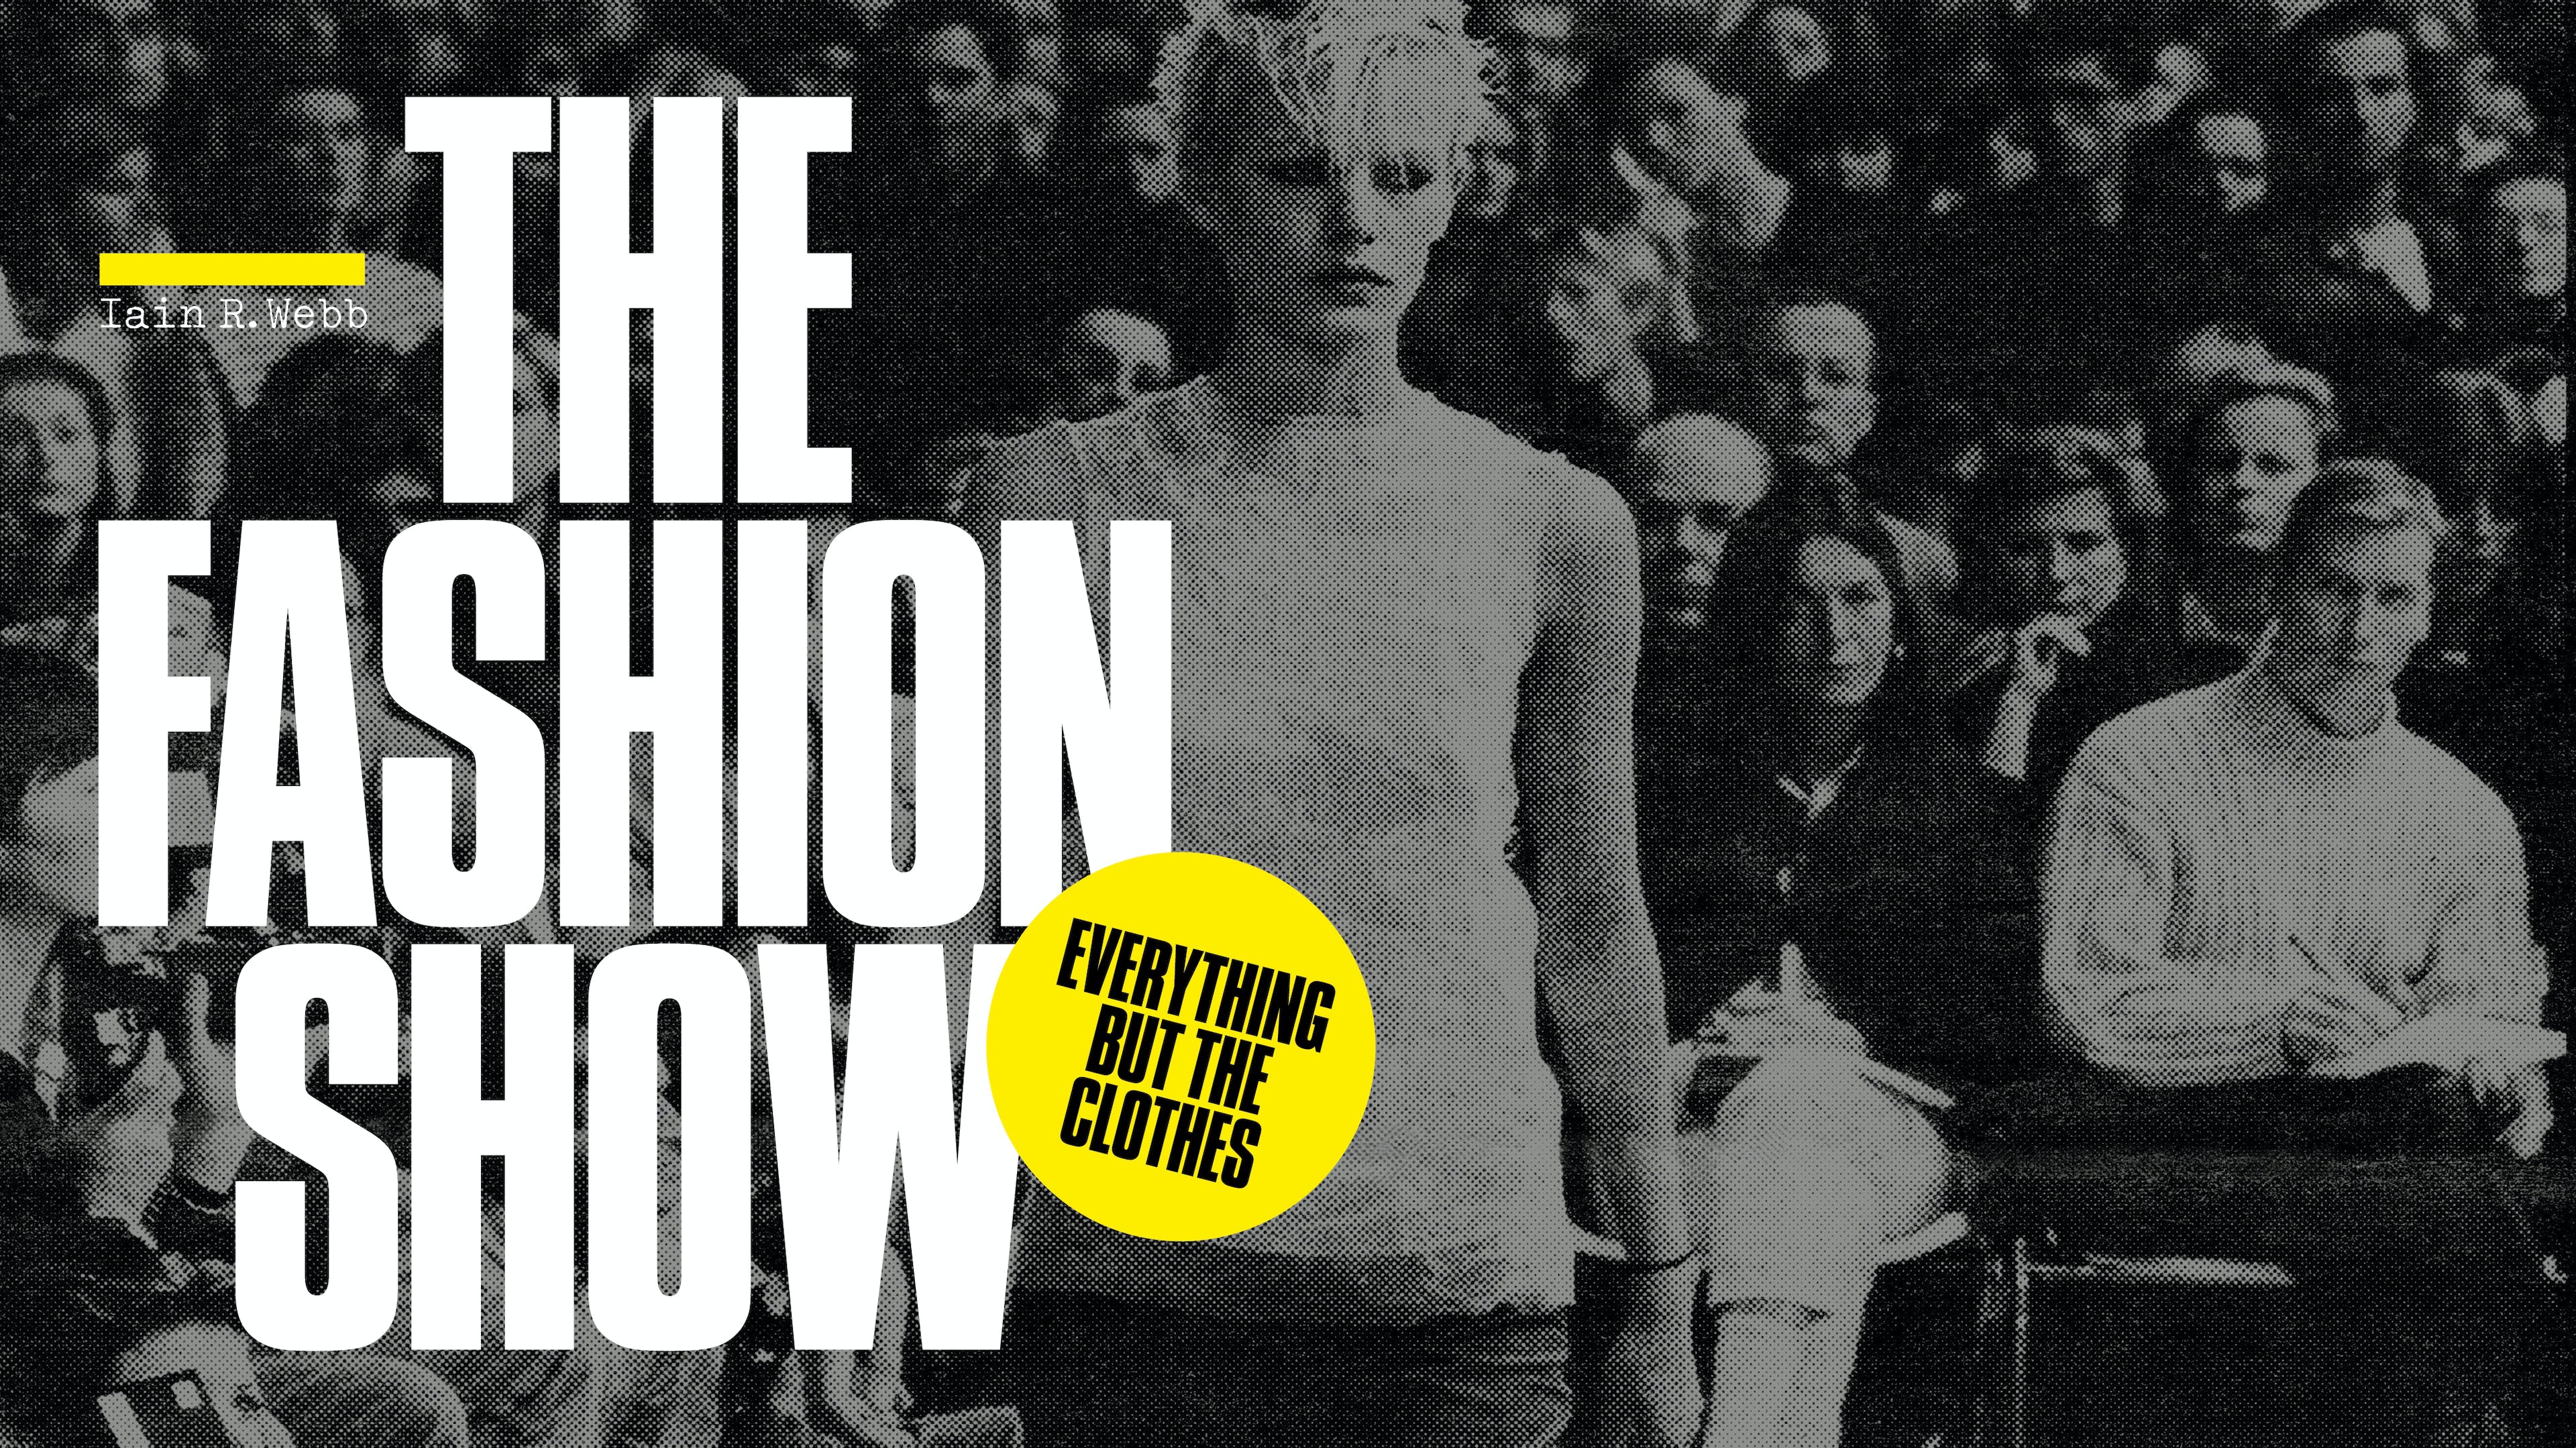 The creative text for The Fashion Show exhibition at V&A Dundee